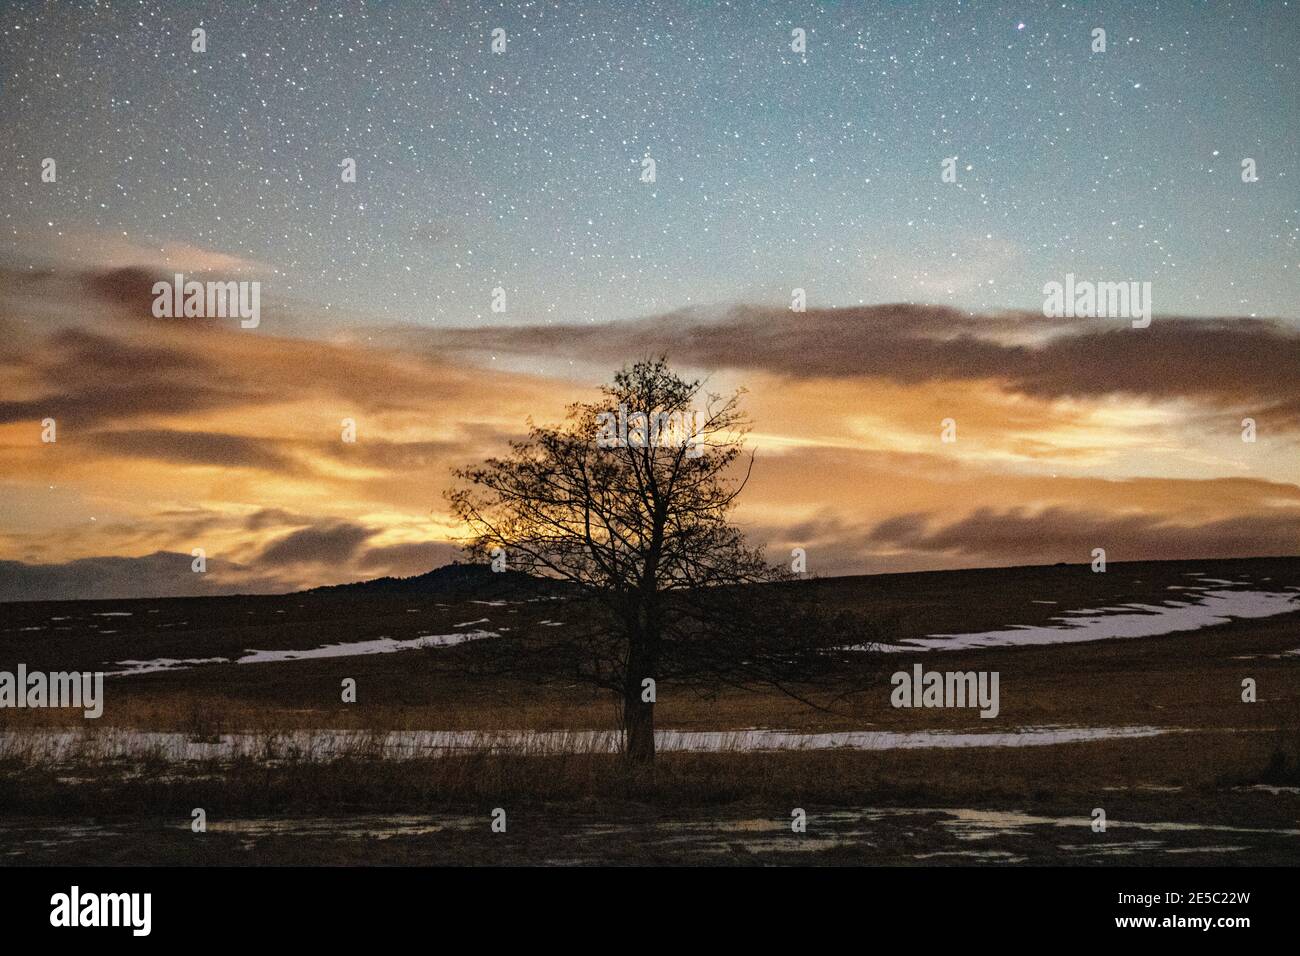 Winter mountain landscape, long exposure night photography, lonely tree and bright stars above them Stock Photo